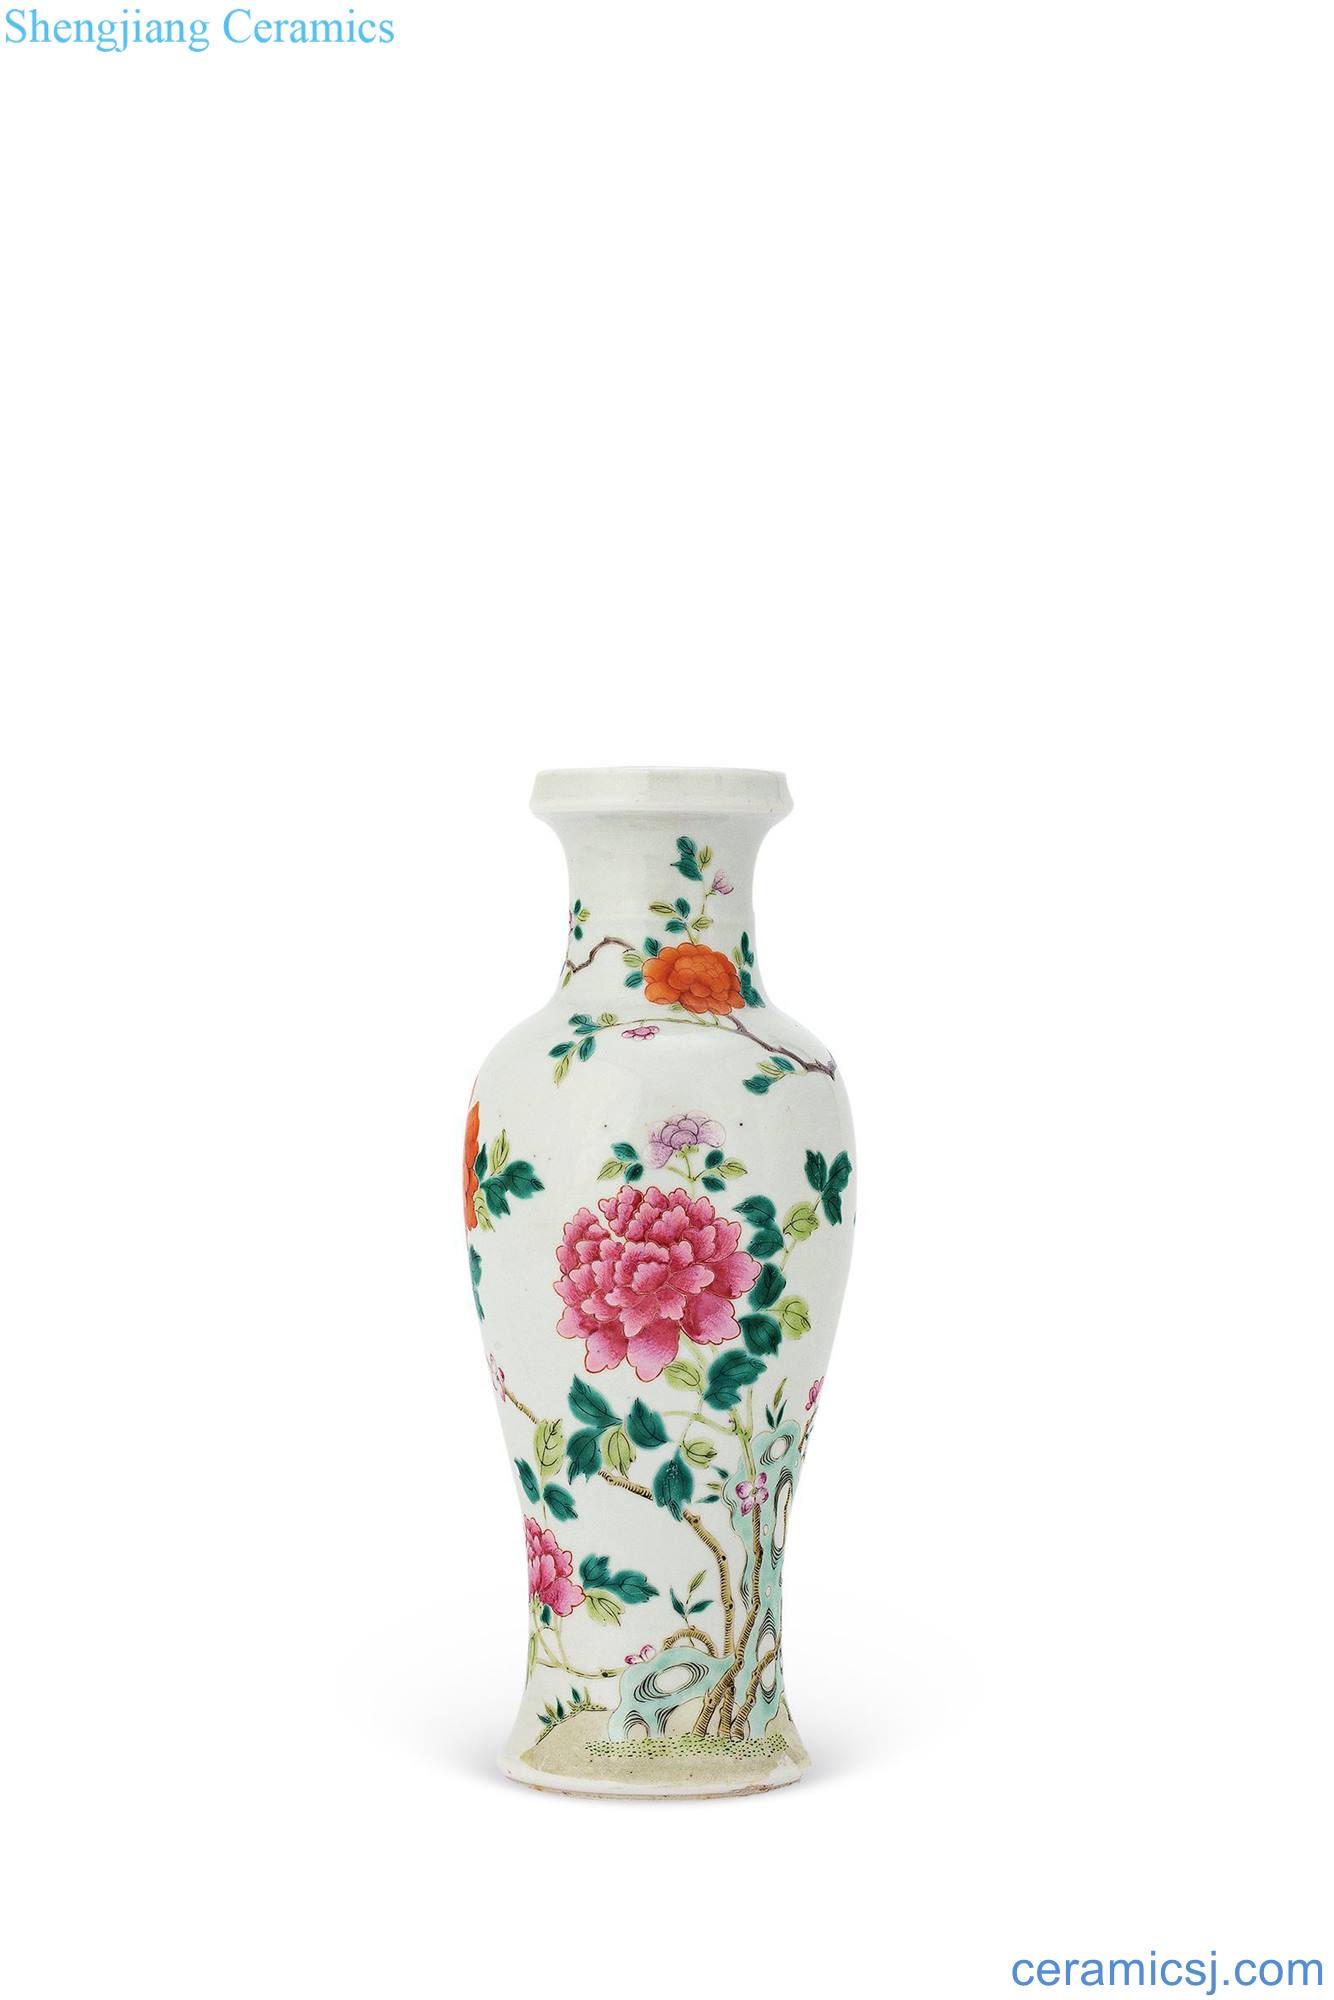 Pastel reign of qing emperor guangxu riches and honor peony figure goddess of mercy bottle